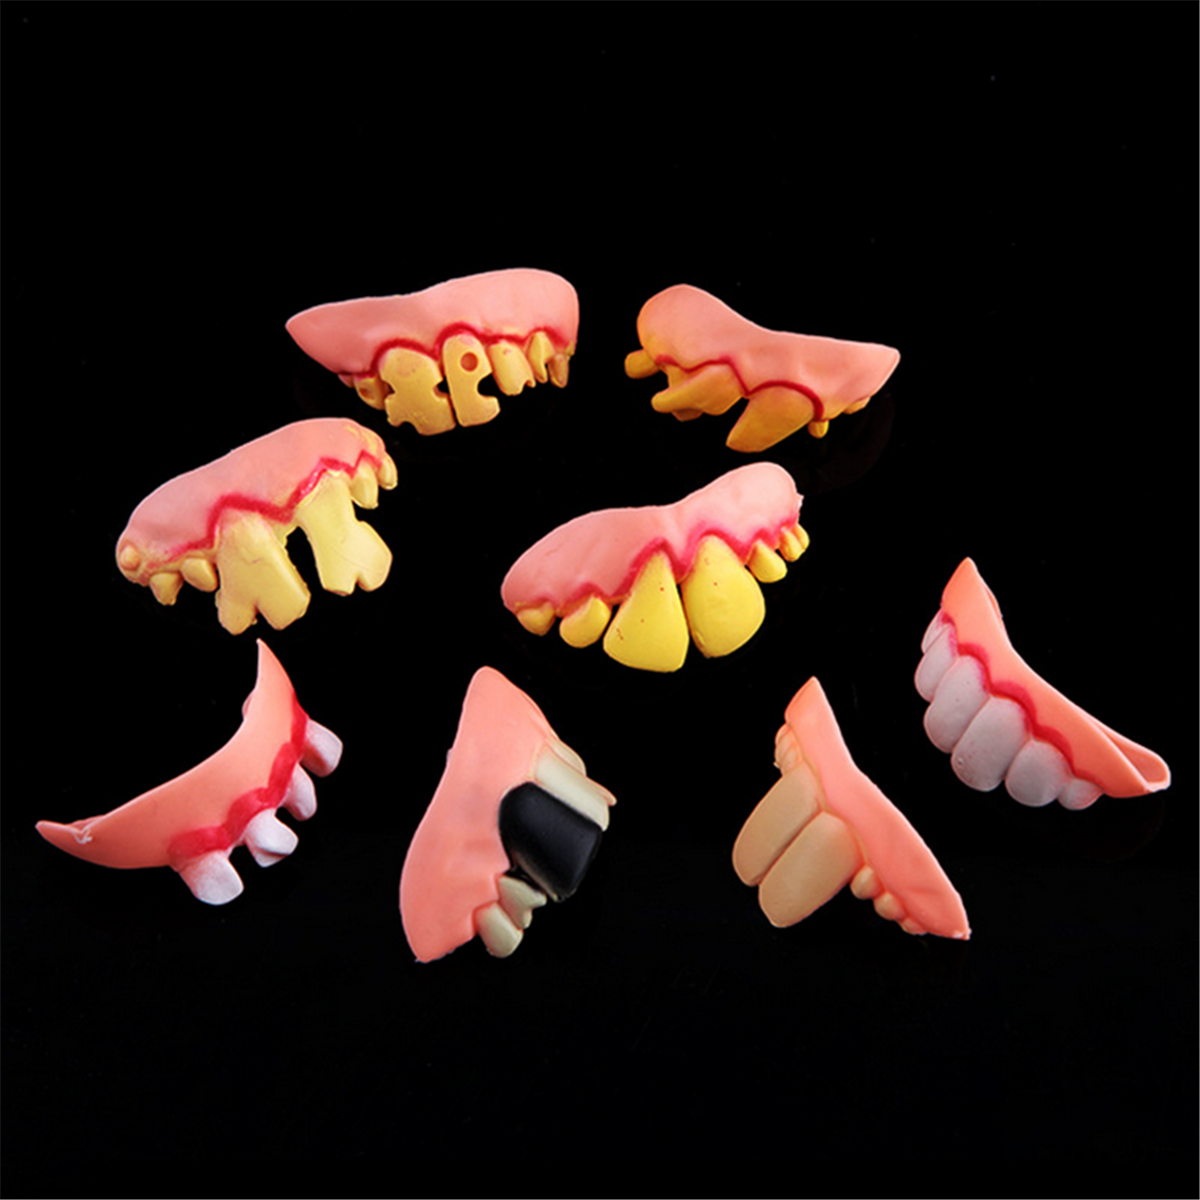 Halloween Funny Faked Teeth Makeup Party Masquerade Prop